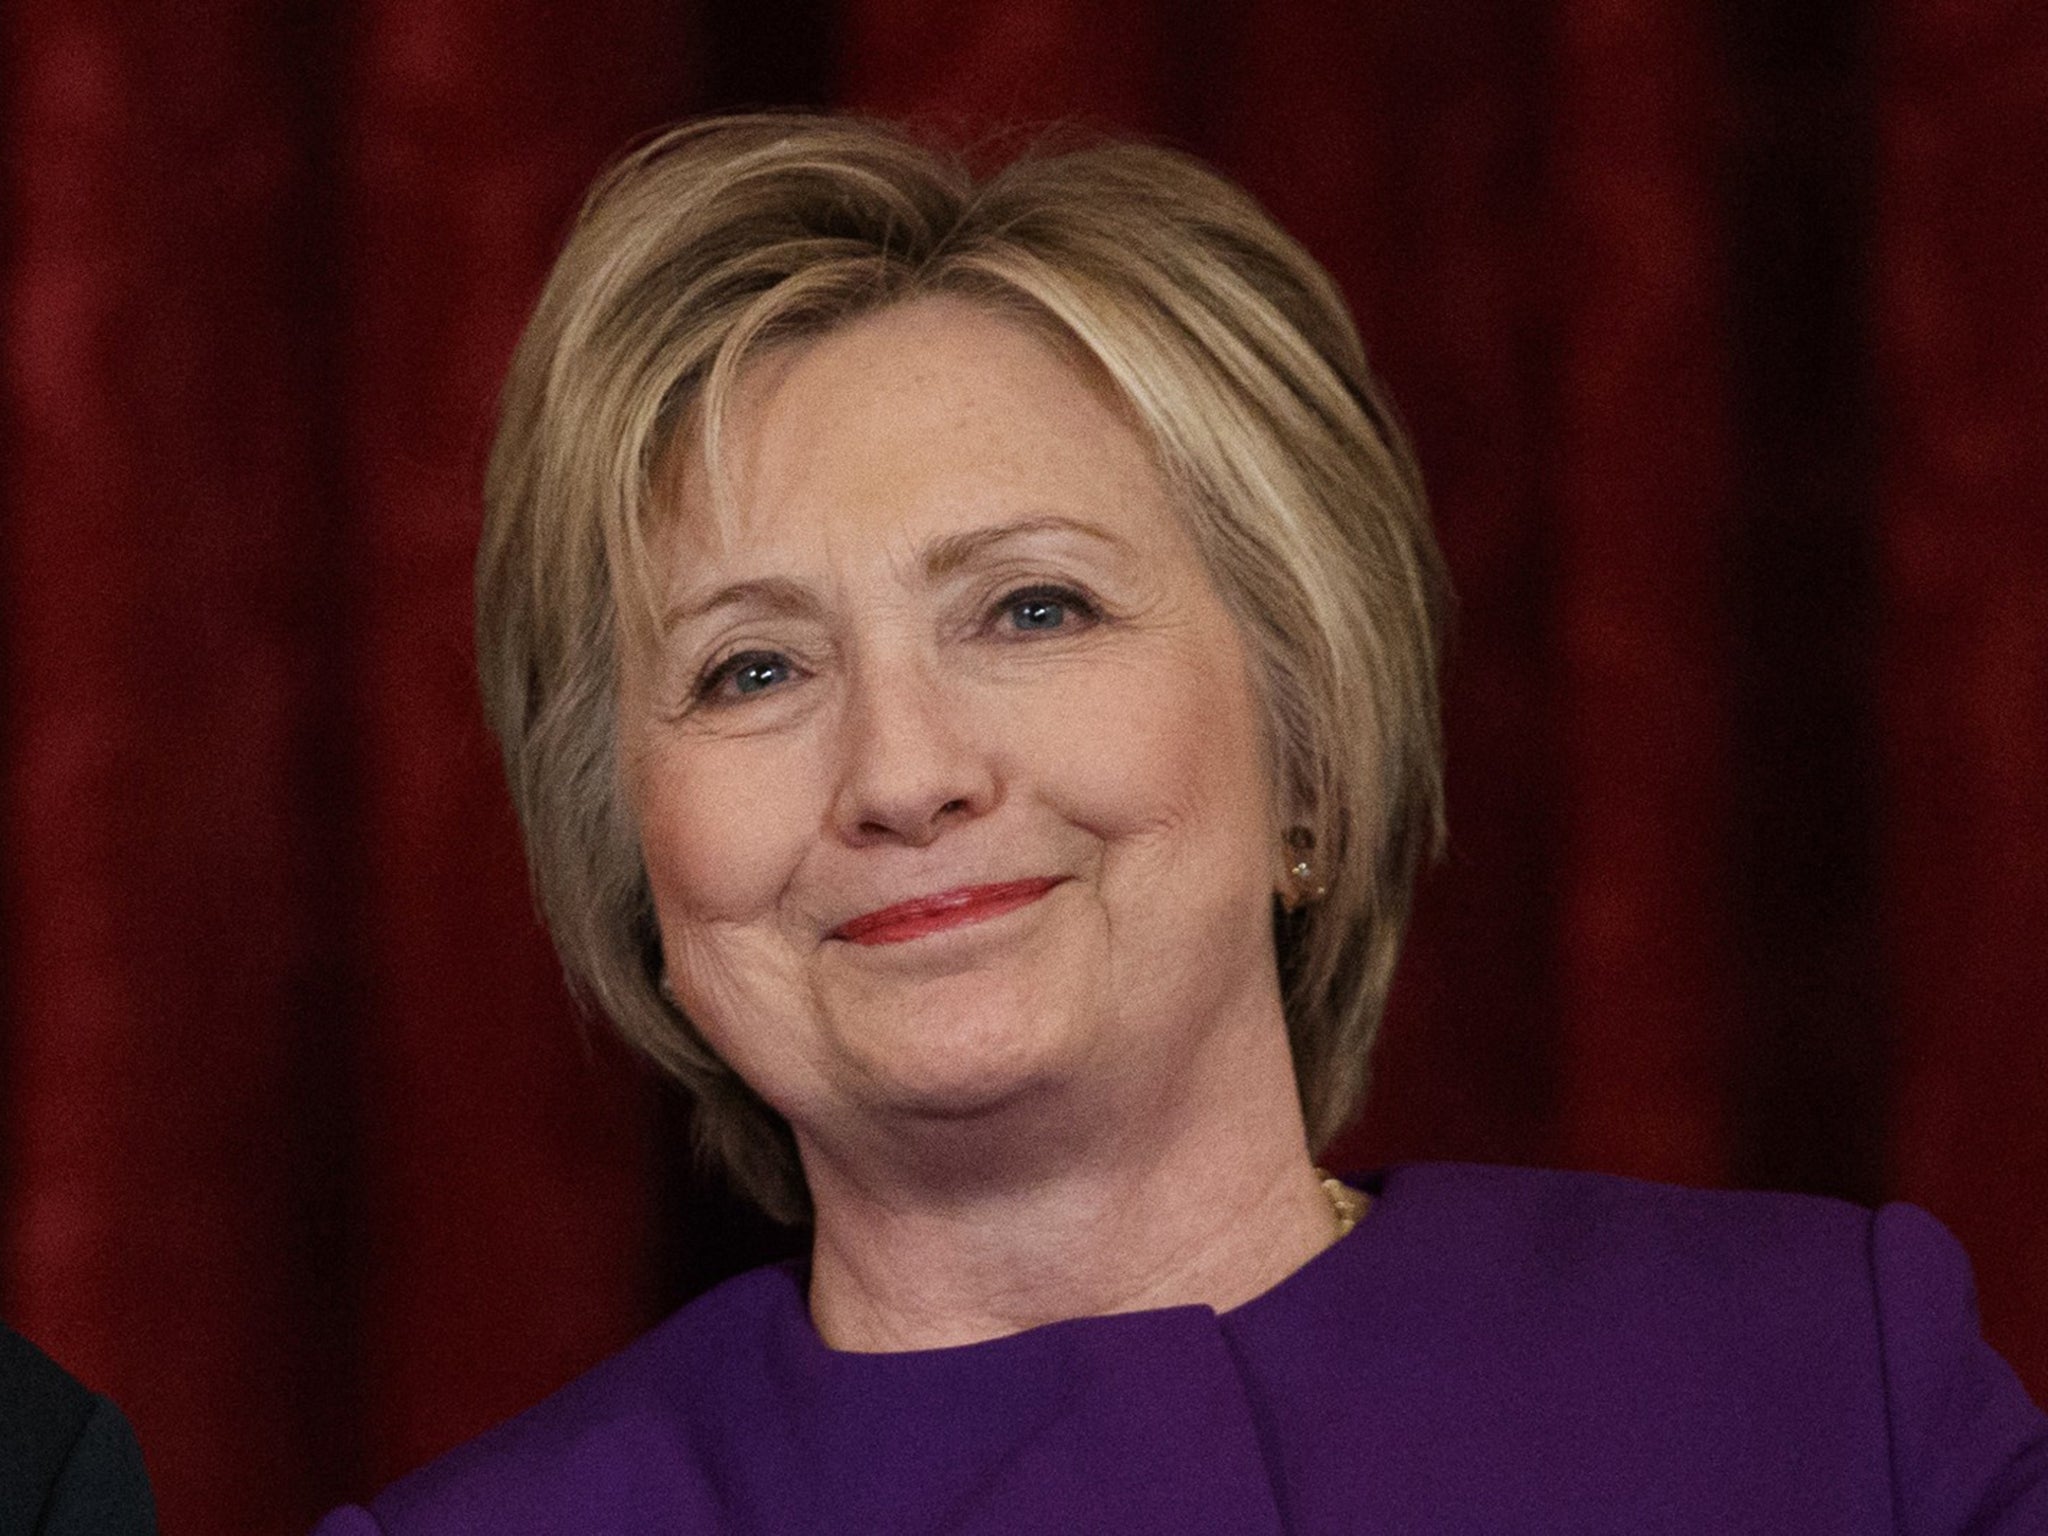 Ms Clinton is also working on a book of personal essays, reflecting on the 18-month campaign